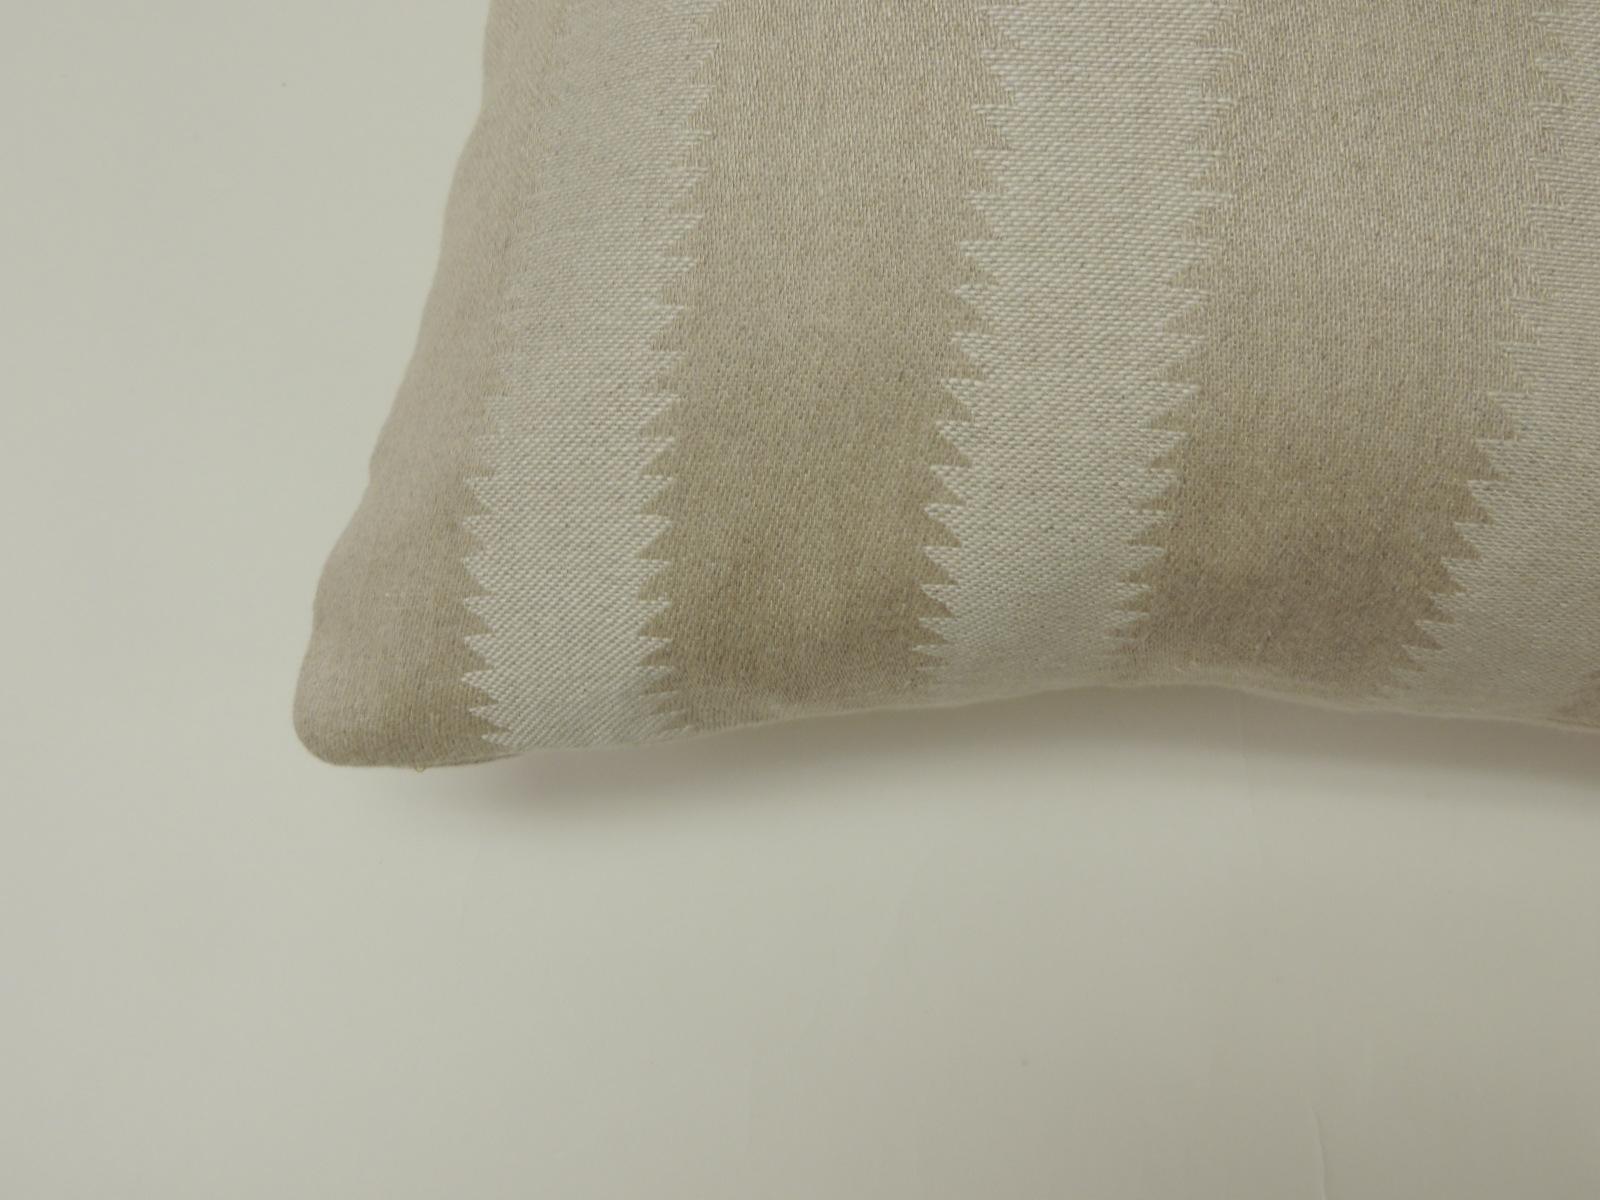 Heavy linen double sided pillows in Rogers & Goffigon fabric Decorative Pillow.
THE SALE PRICE IS PER PILLOW.
Color: Swordfish
Name: Sawtooth
The price on the pillow includes a custom ATG feather/down insert. Invisible zipper closure. 
 Hand-crafted